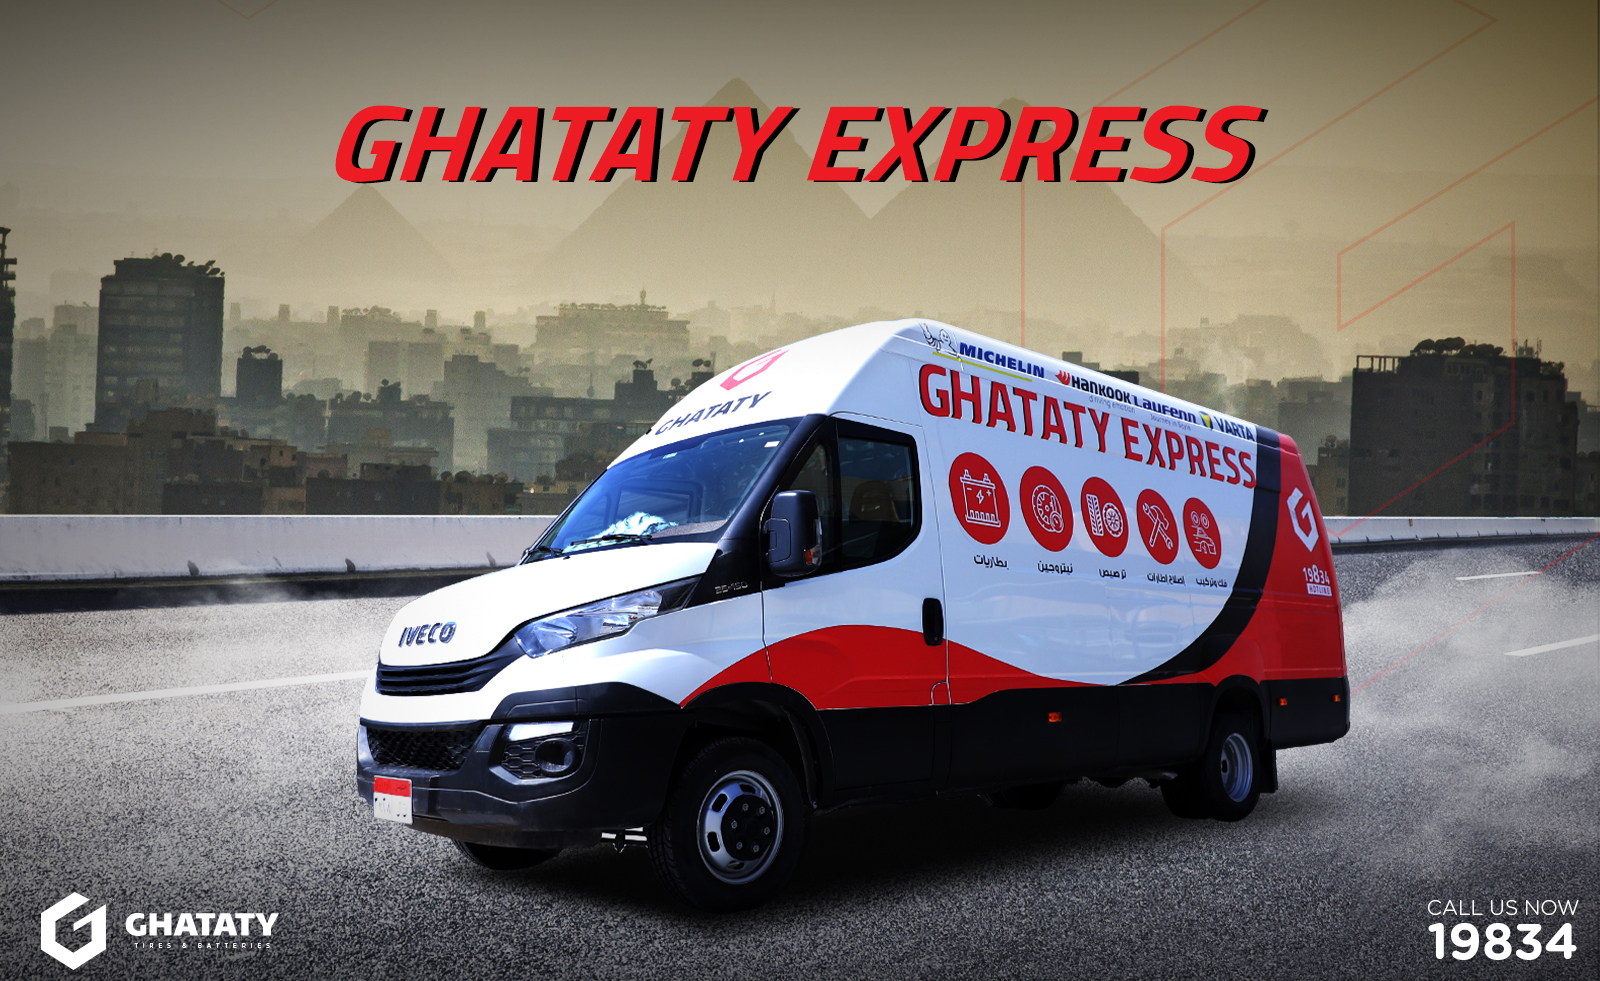 Ghataty Express service in North Coast during summer